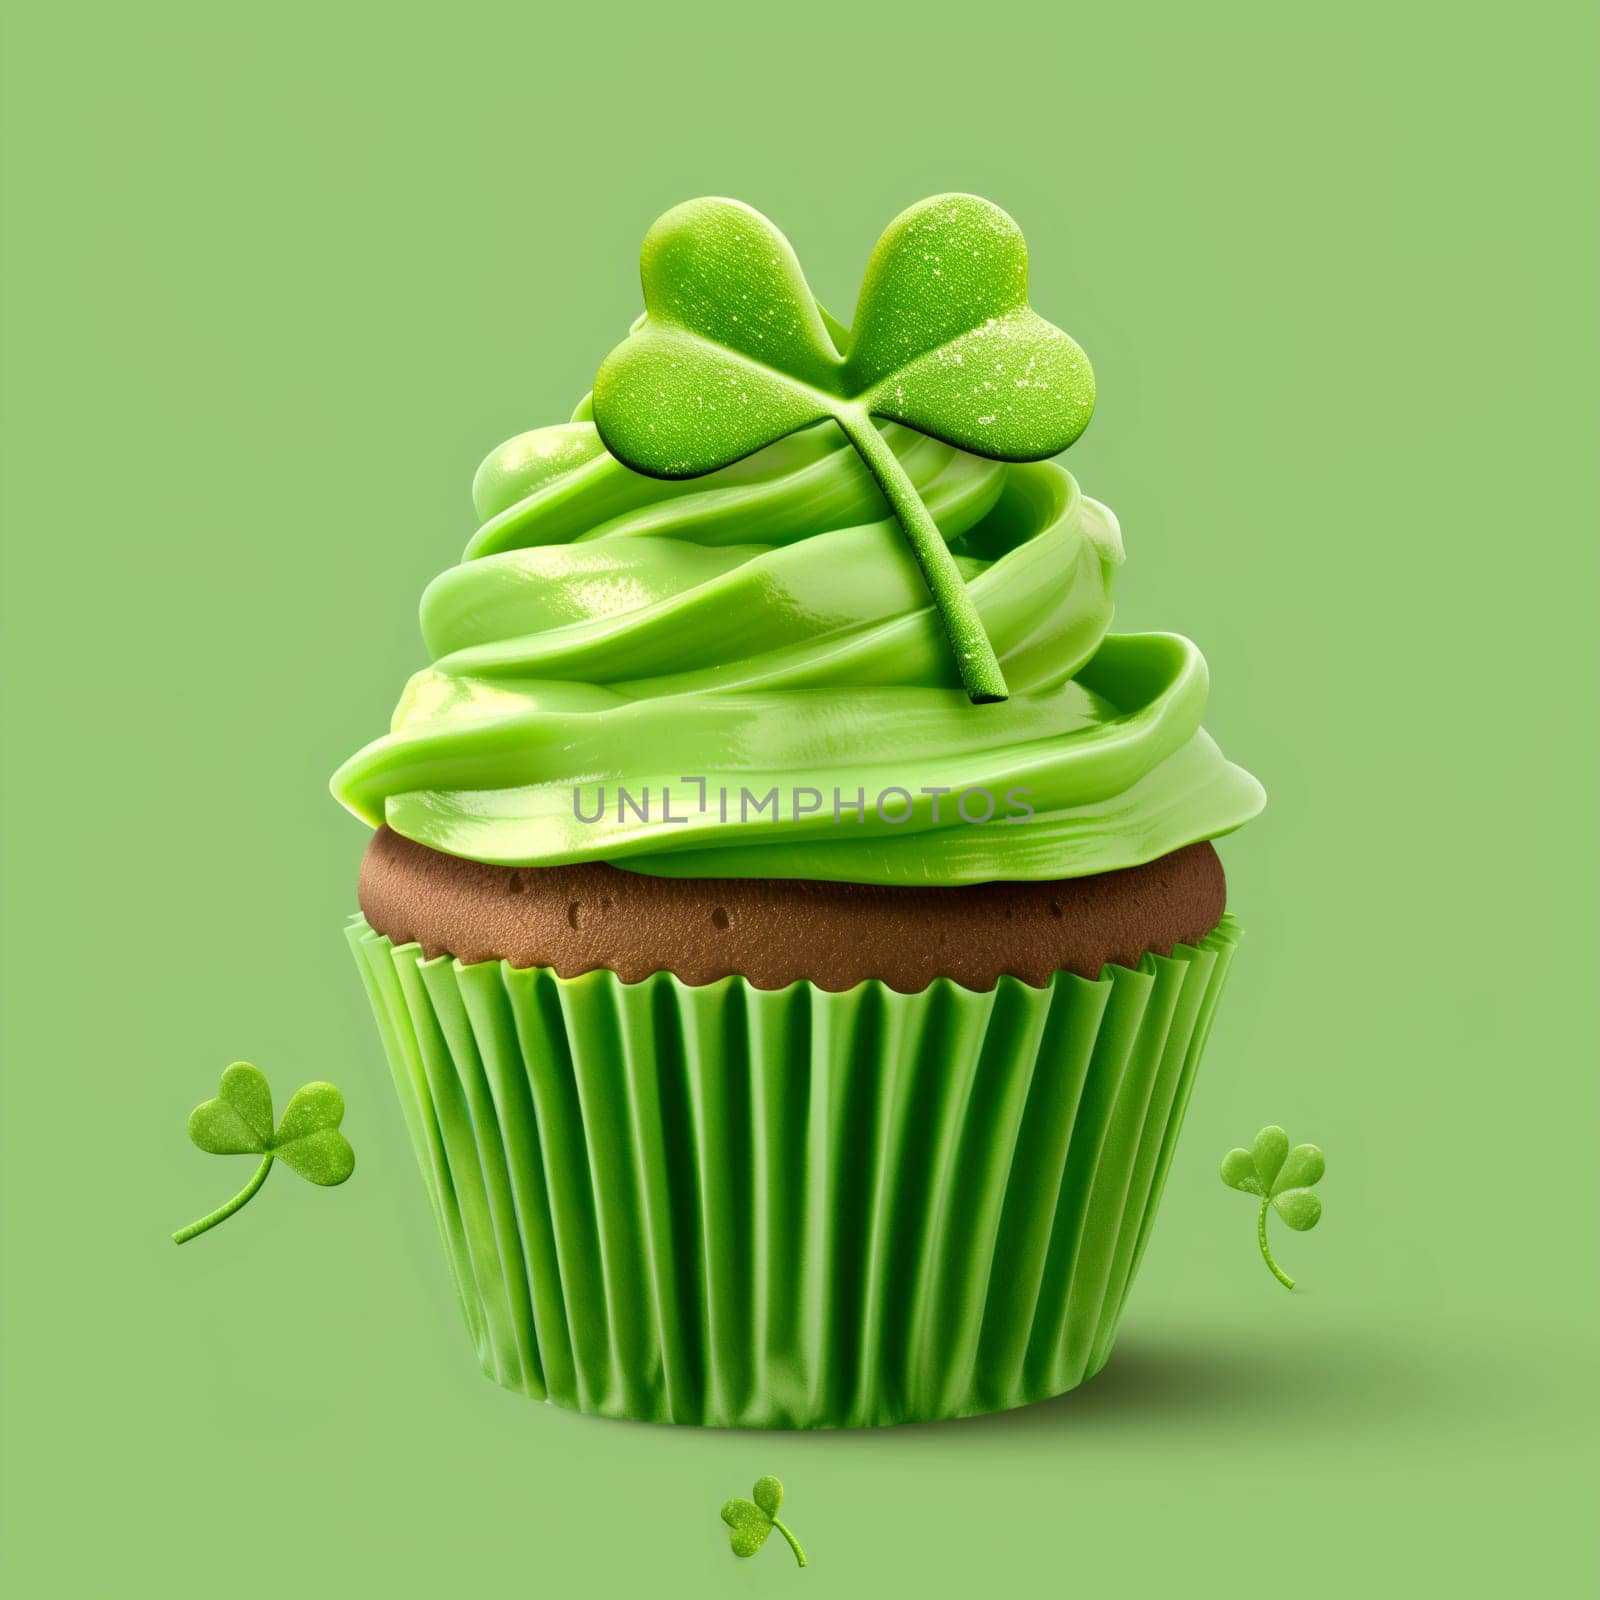 One freshly baked cupcake with green buttercream and falling shamrock leaves stands on a green background, side view close-up.